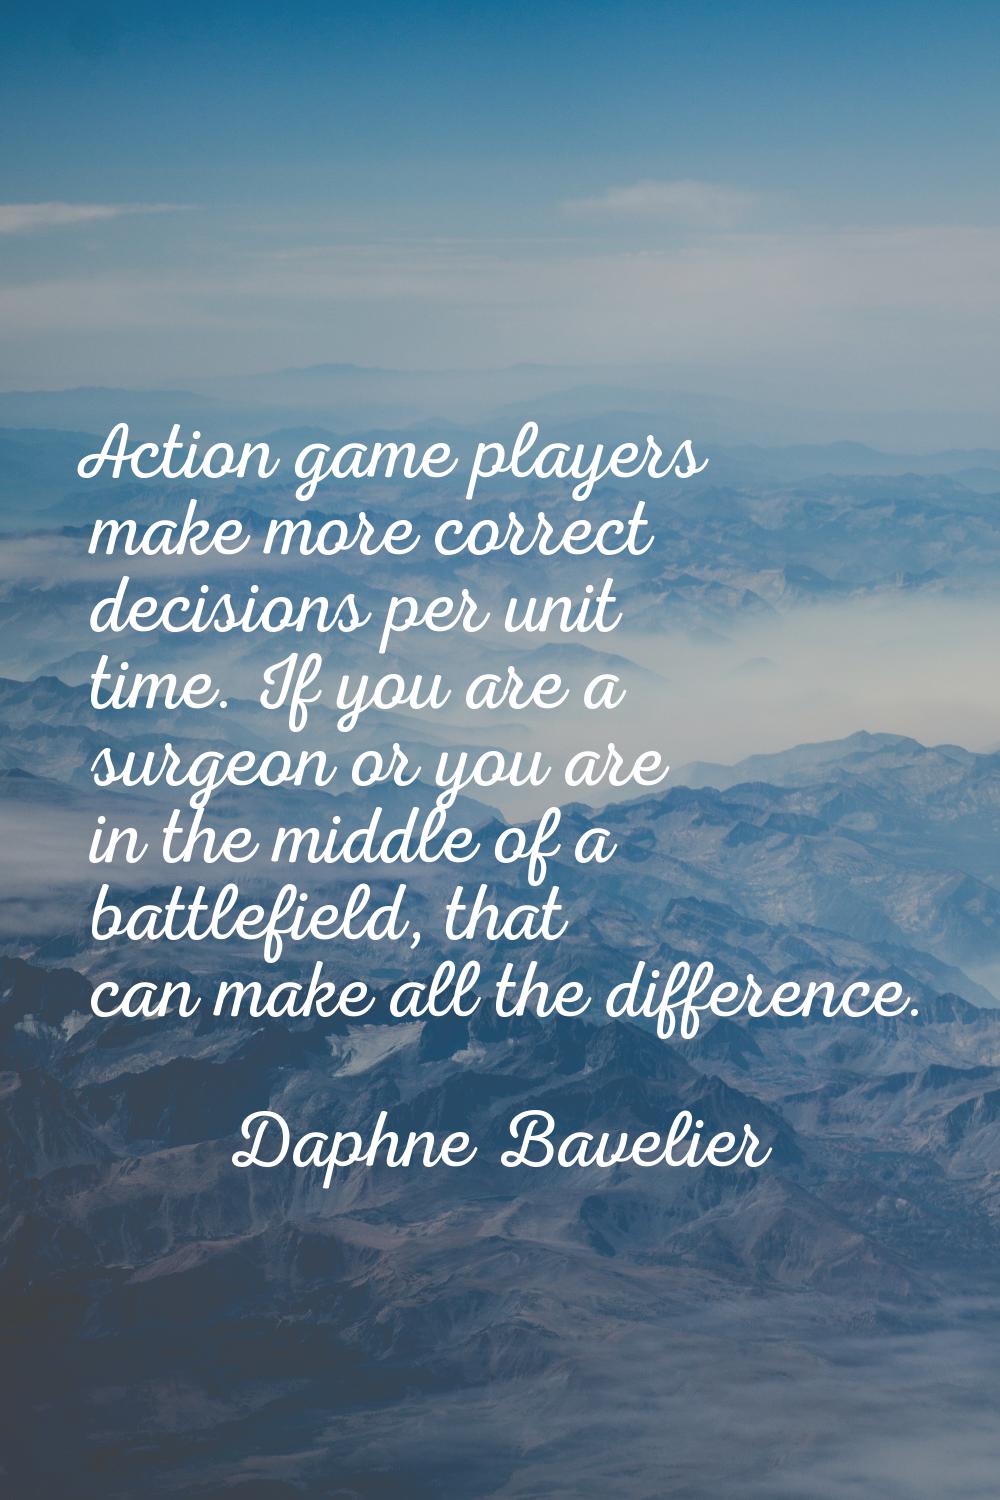 Action game players make more correct decisions per unit time. If you are a surgeon or you are in t